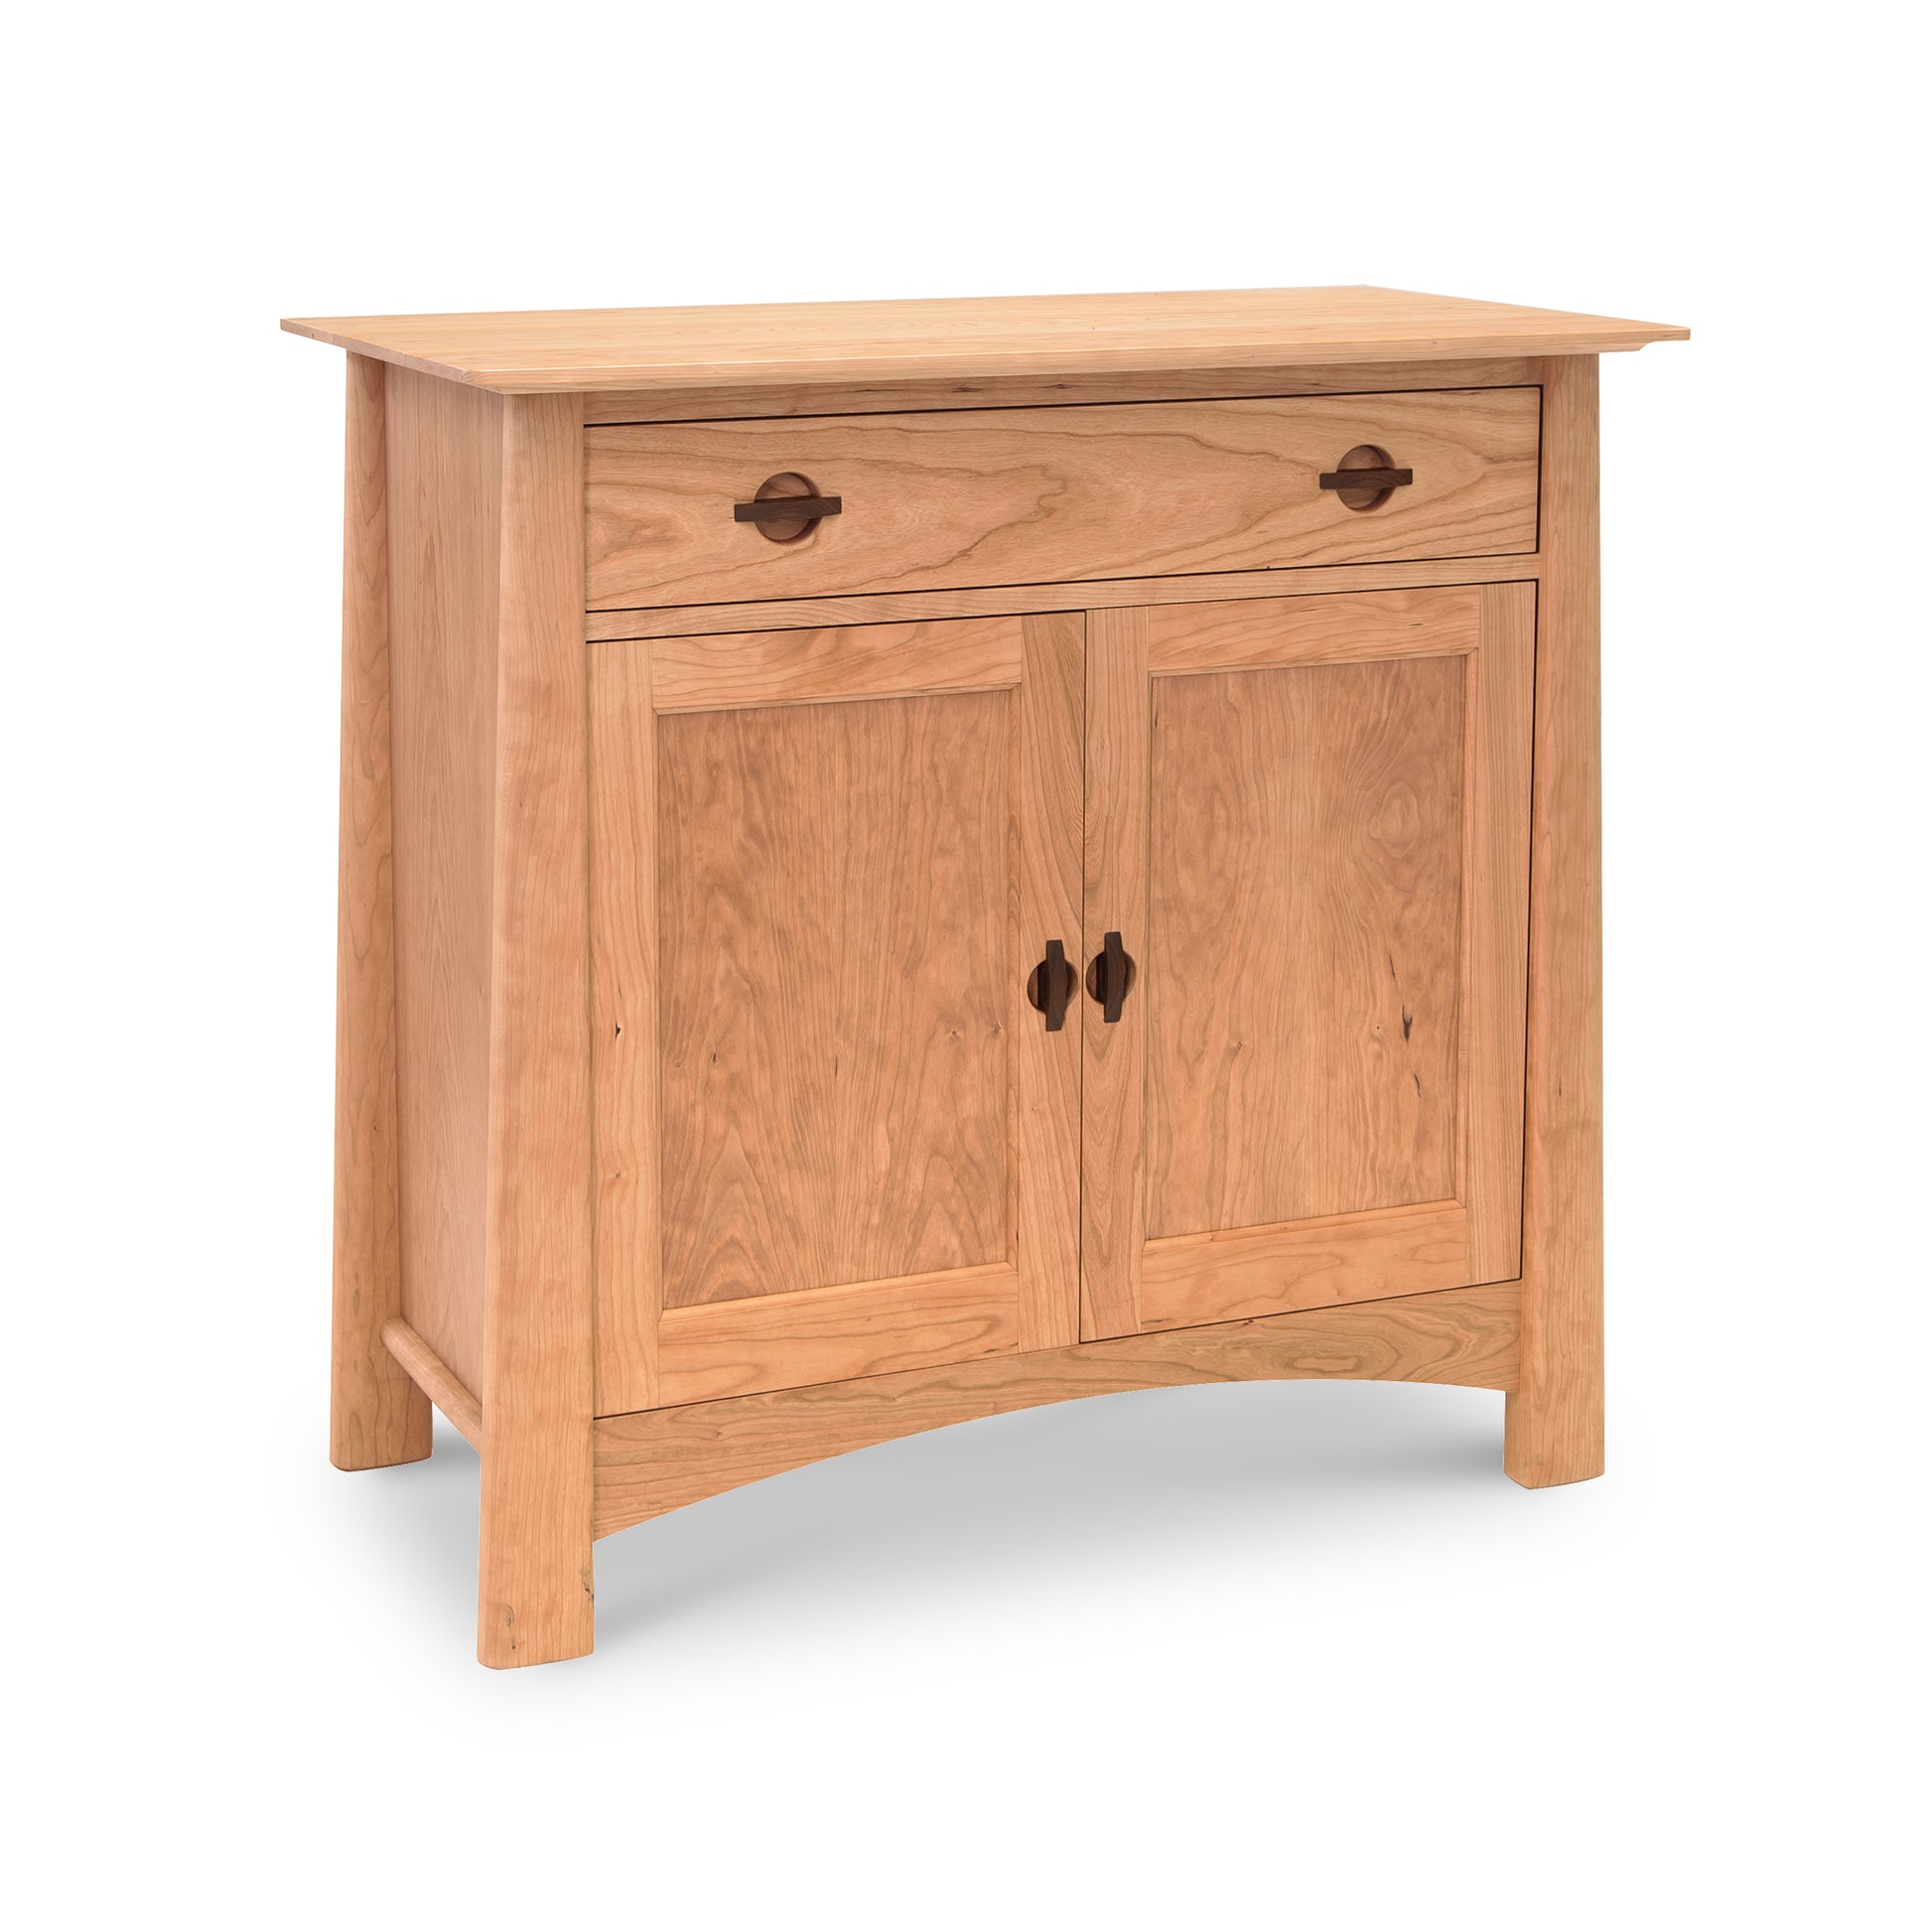 An eco-friendly Cherry Moon Small 38" Sideboard by Maple Corner Woodworks, with two doors and two drawers, offering extra storage.